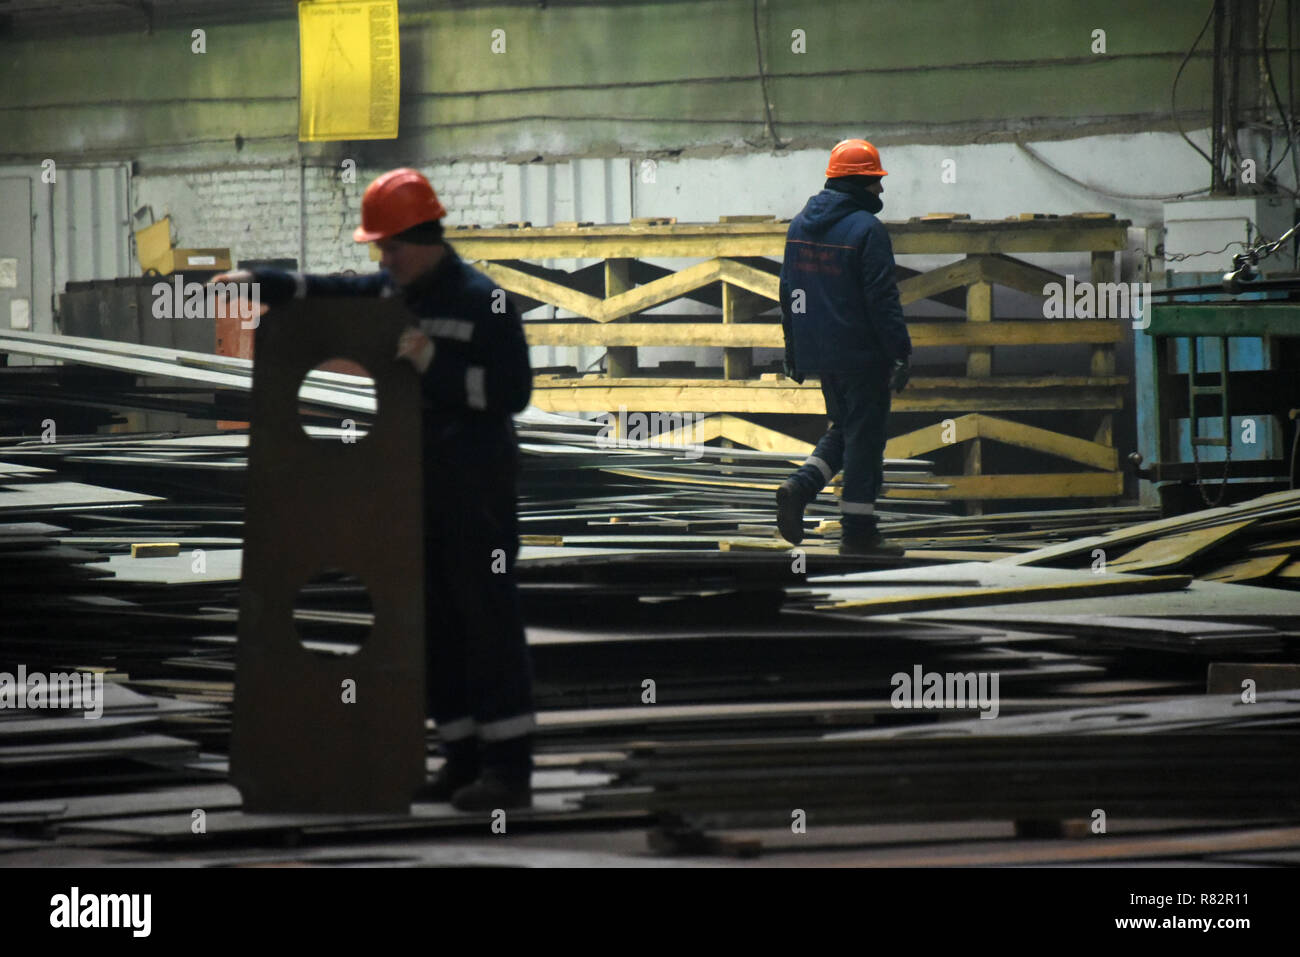 Ship building at the Russian shipyard "LOTOS" in Astrakhan, Russia. Stock Photo